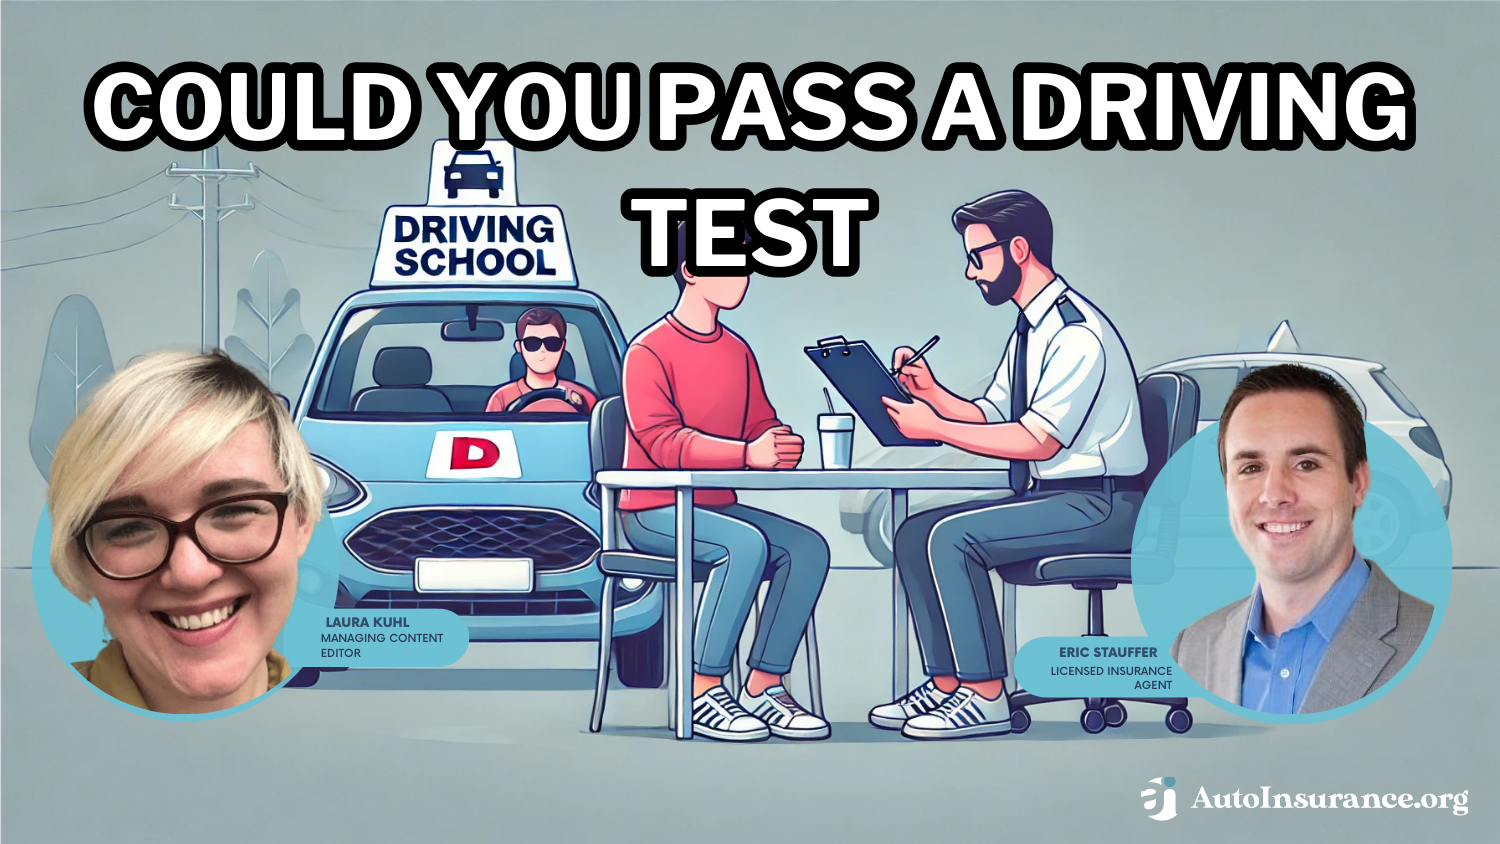 Could you pass a driving test?